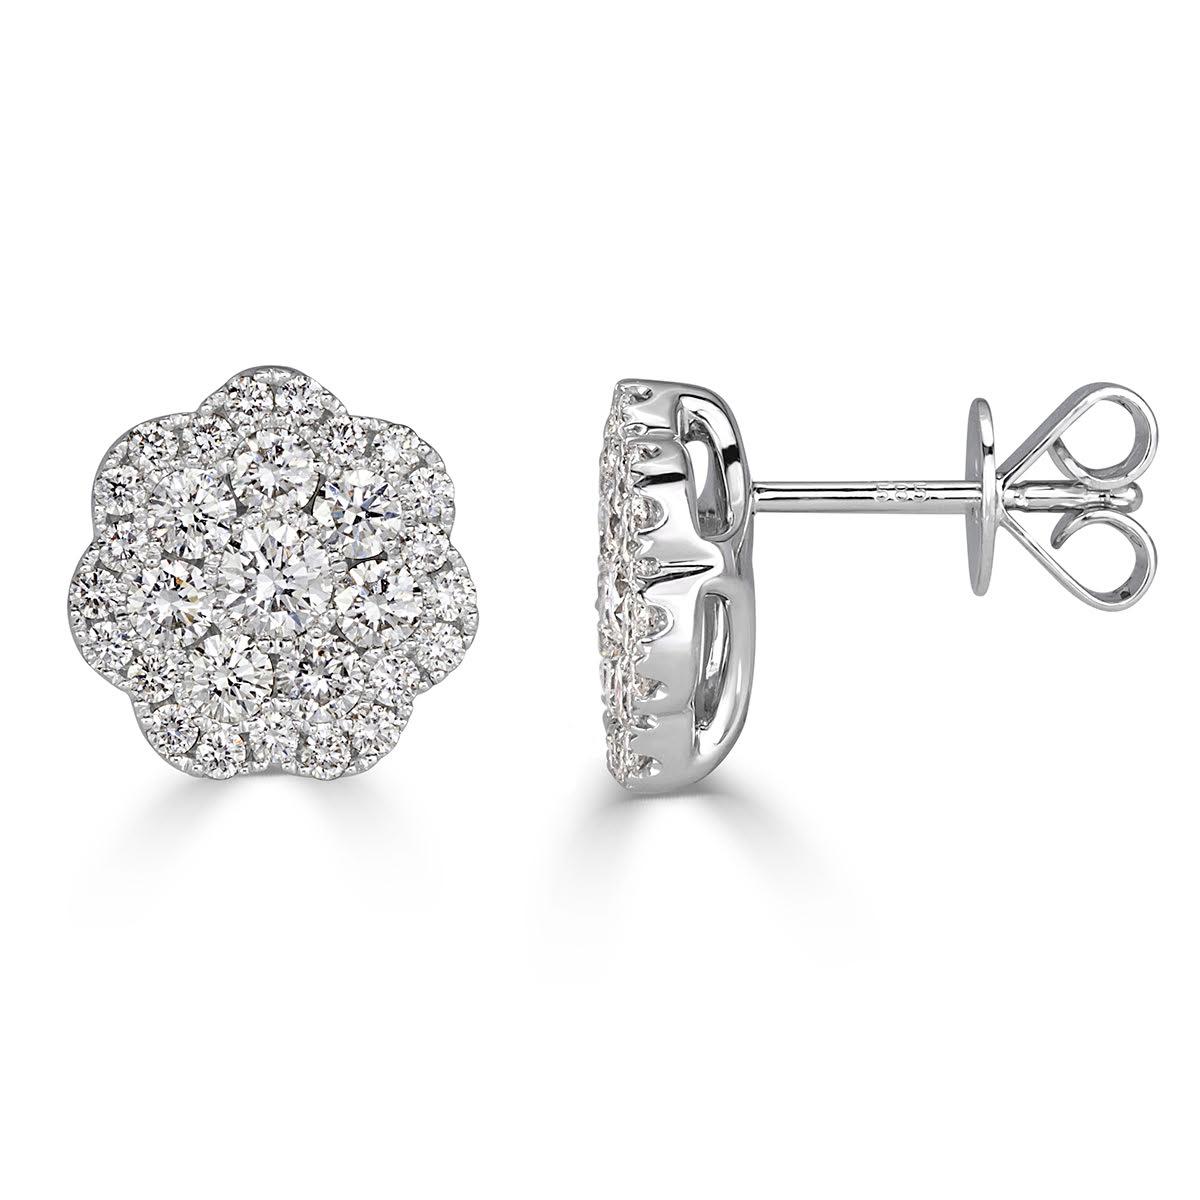 Absolutely stunning from every angle, this exquisite pair of diamond stud earrings showcases 1.50ct of round brilliant cut diamonds graded at E-F, VS1-VS2. The are set in a lovely, 14k white gold floral design. This stylish pair of earrings is truly